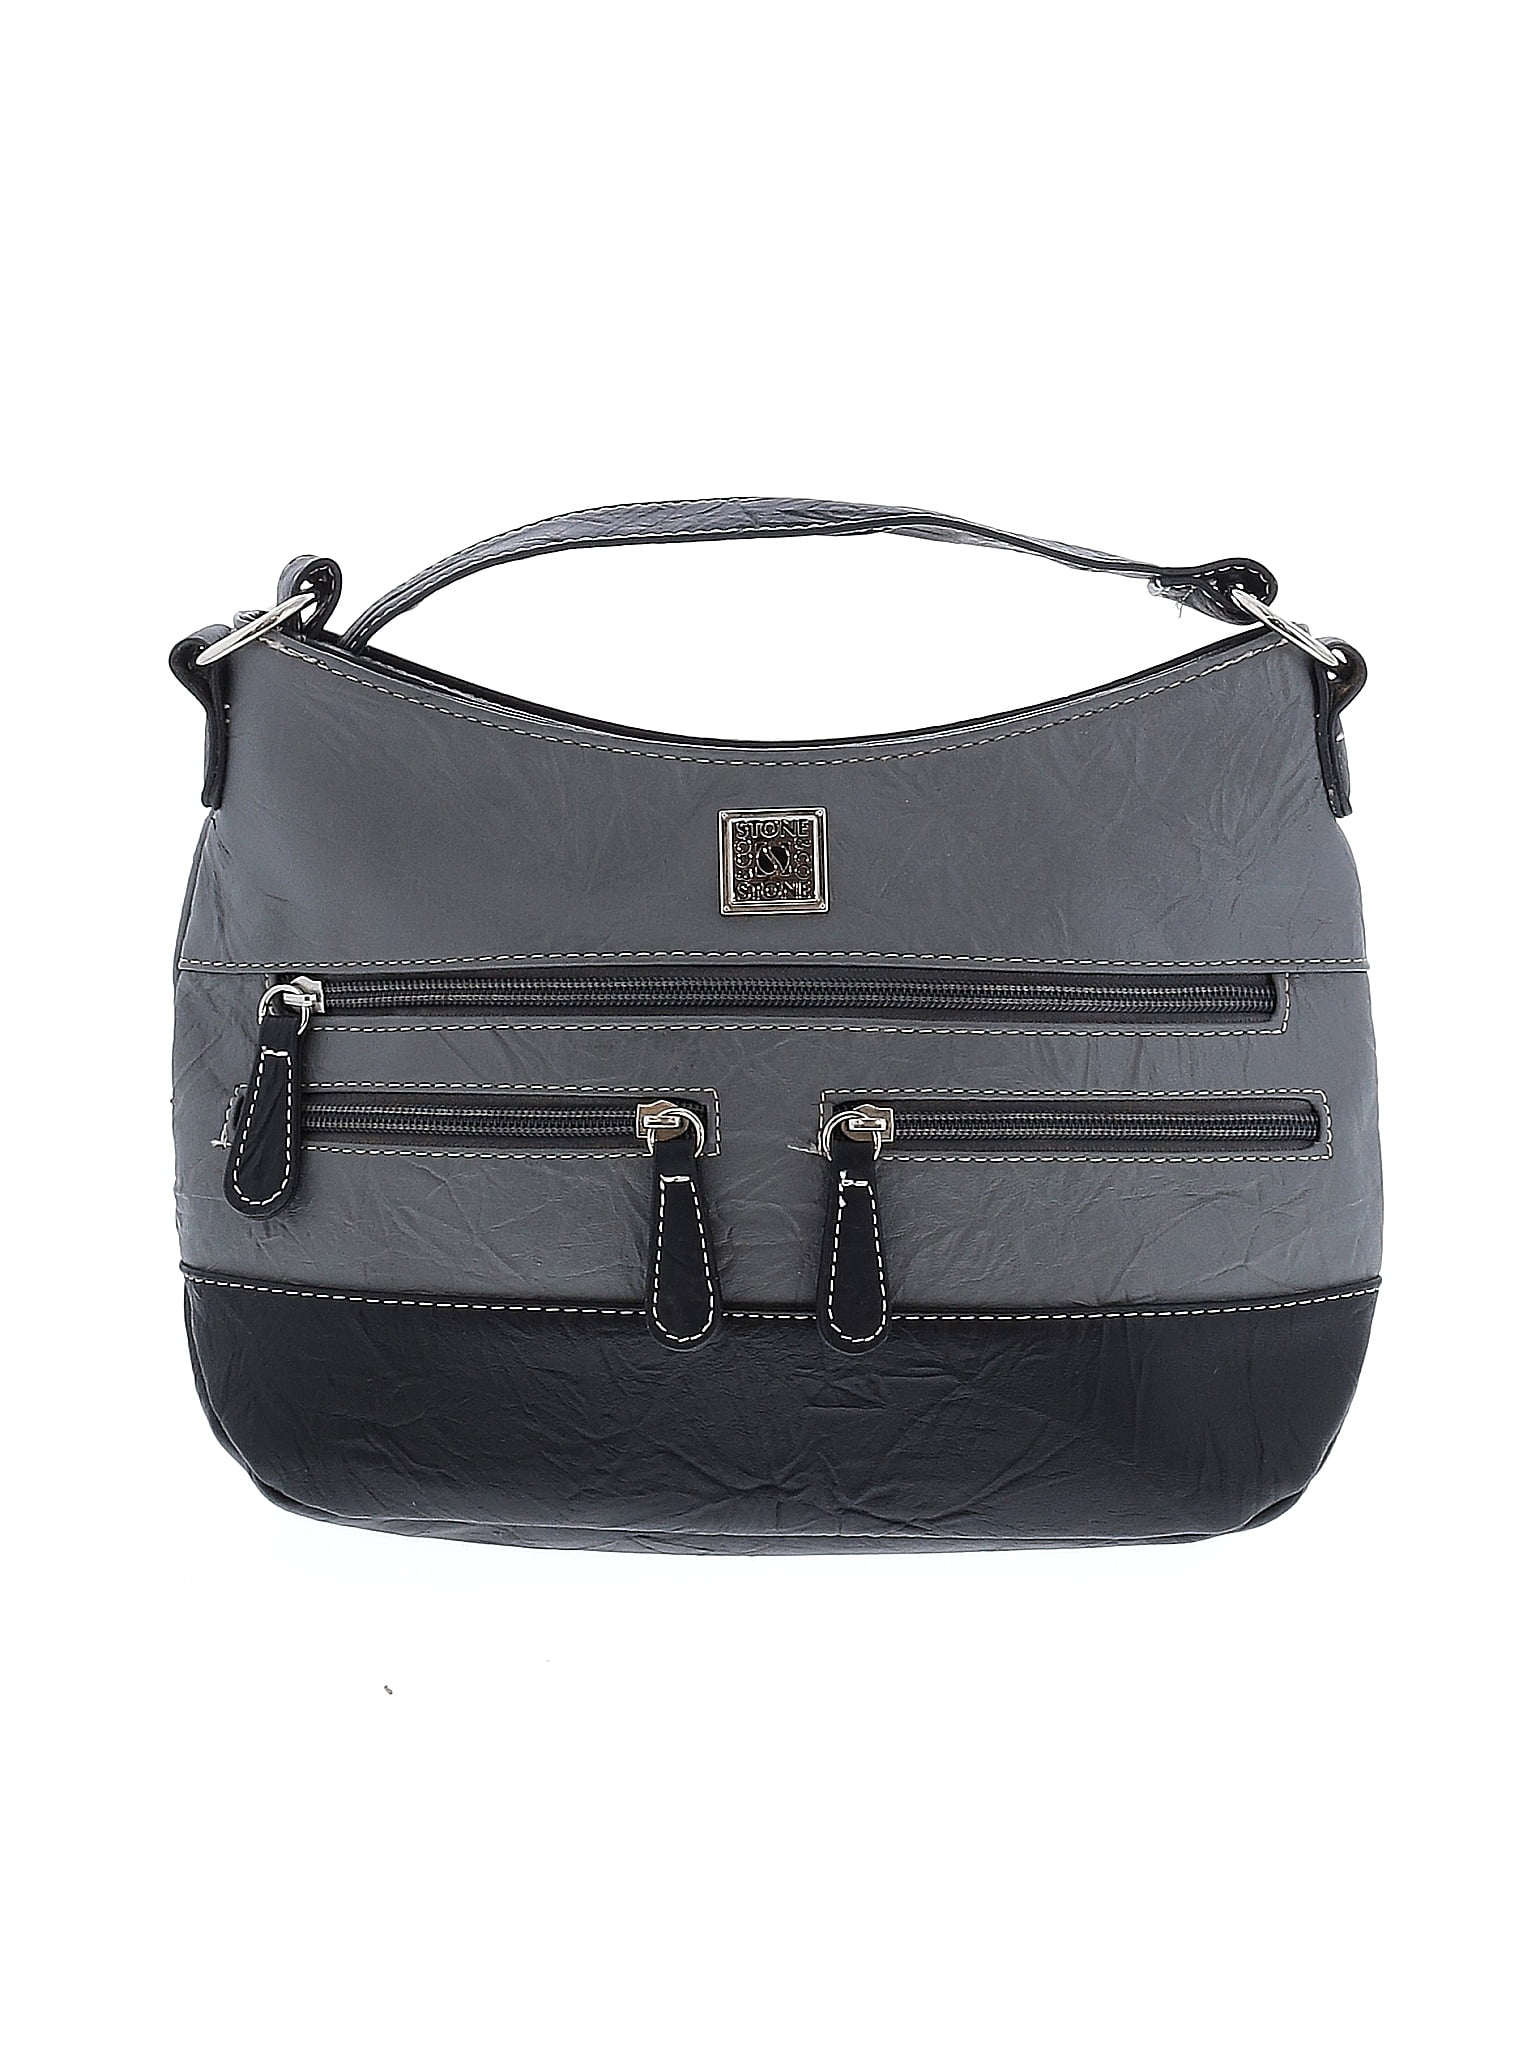 Women's Stone & Co. Handbags and Purses: Shop for Accessories and More